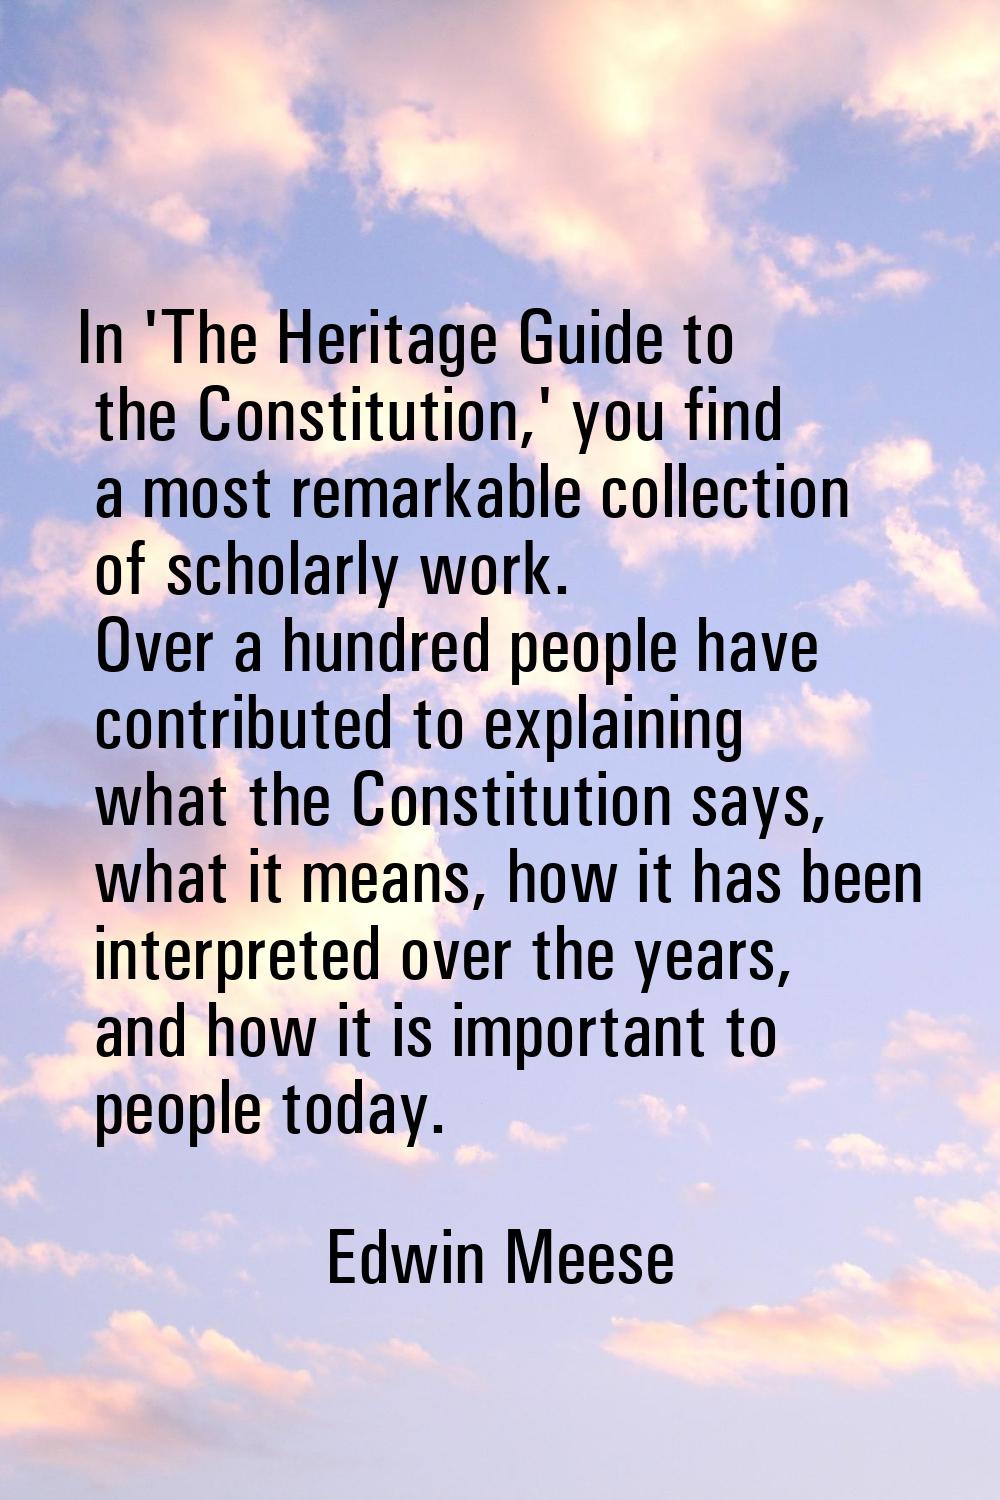 In 'The Heritage Guide to the Constitution,' you find a most remarkable collection of scholarly wor